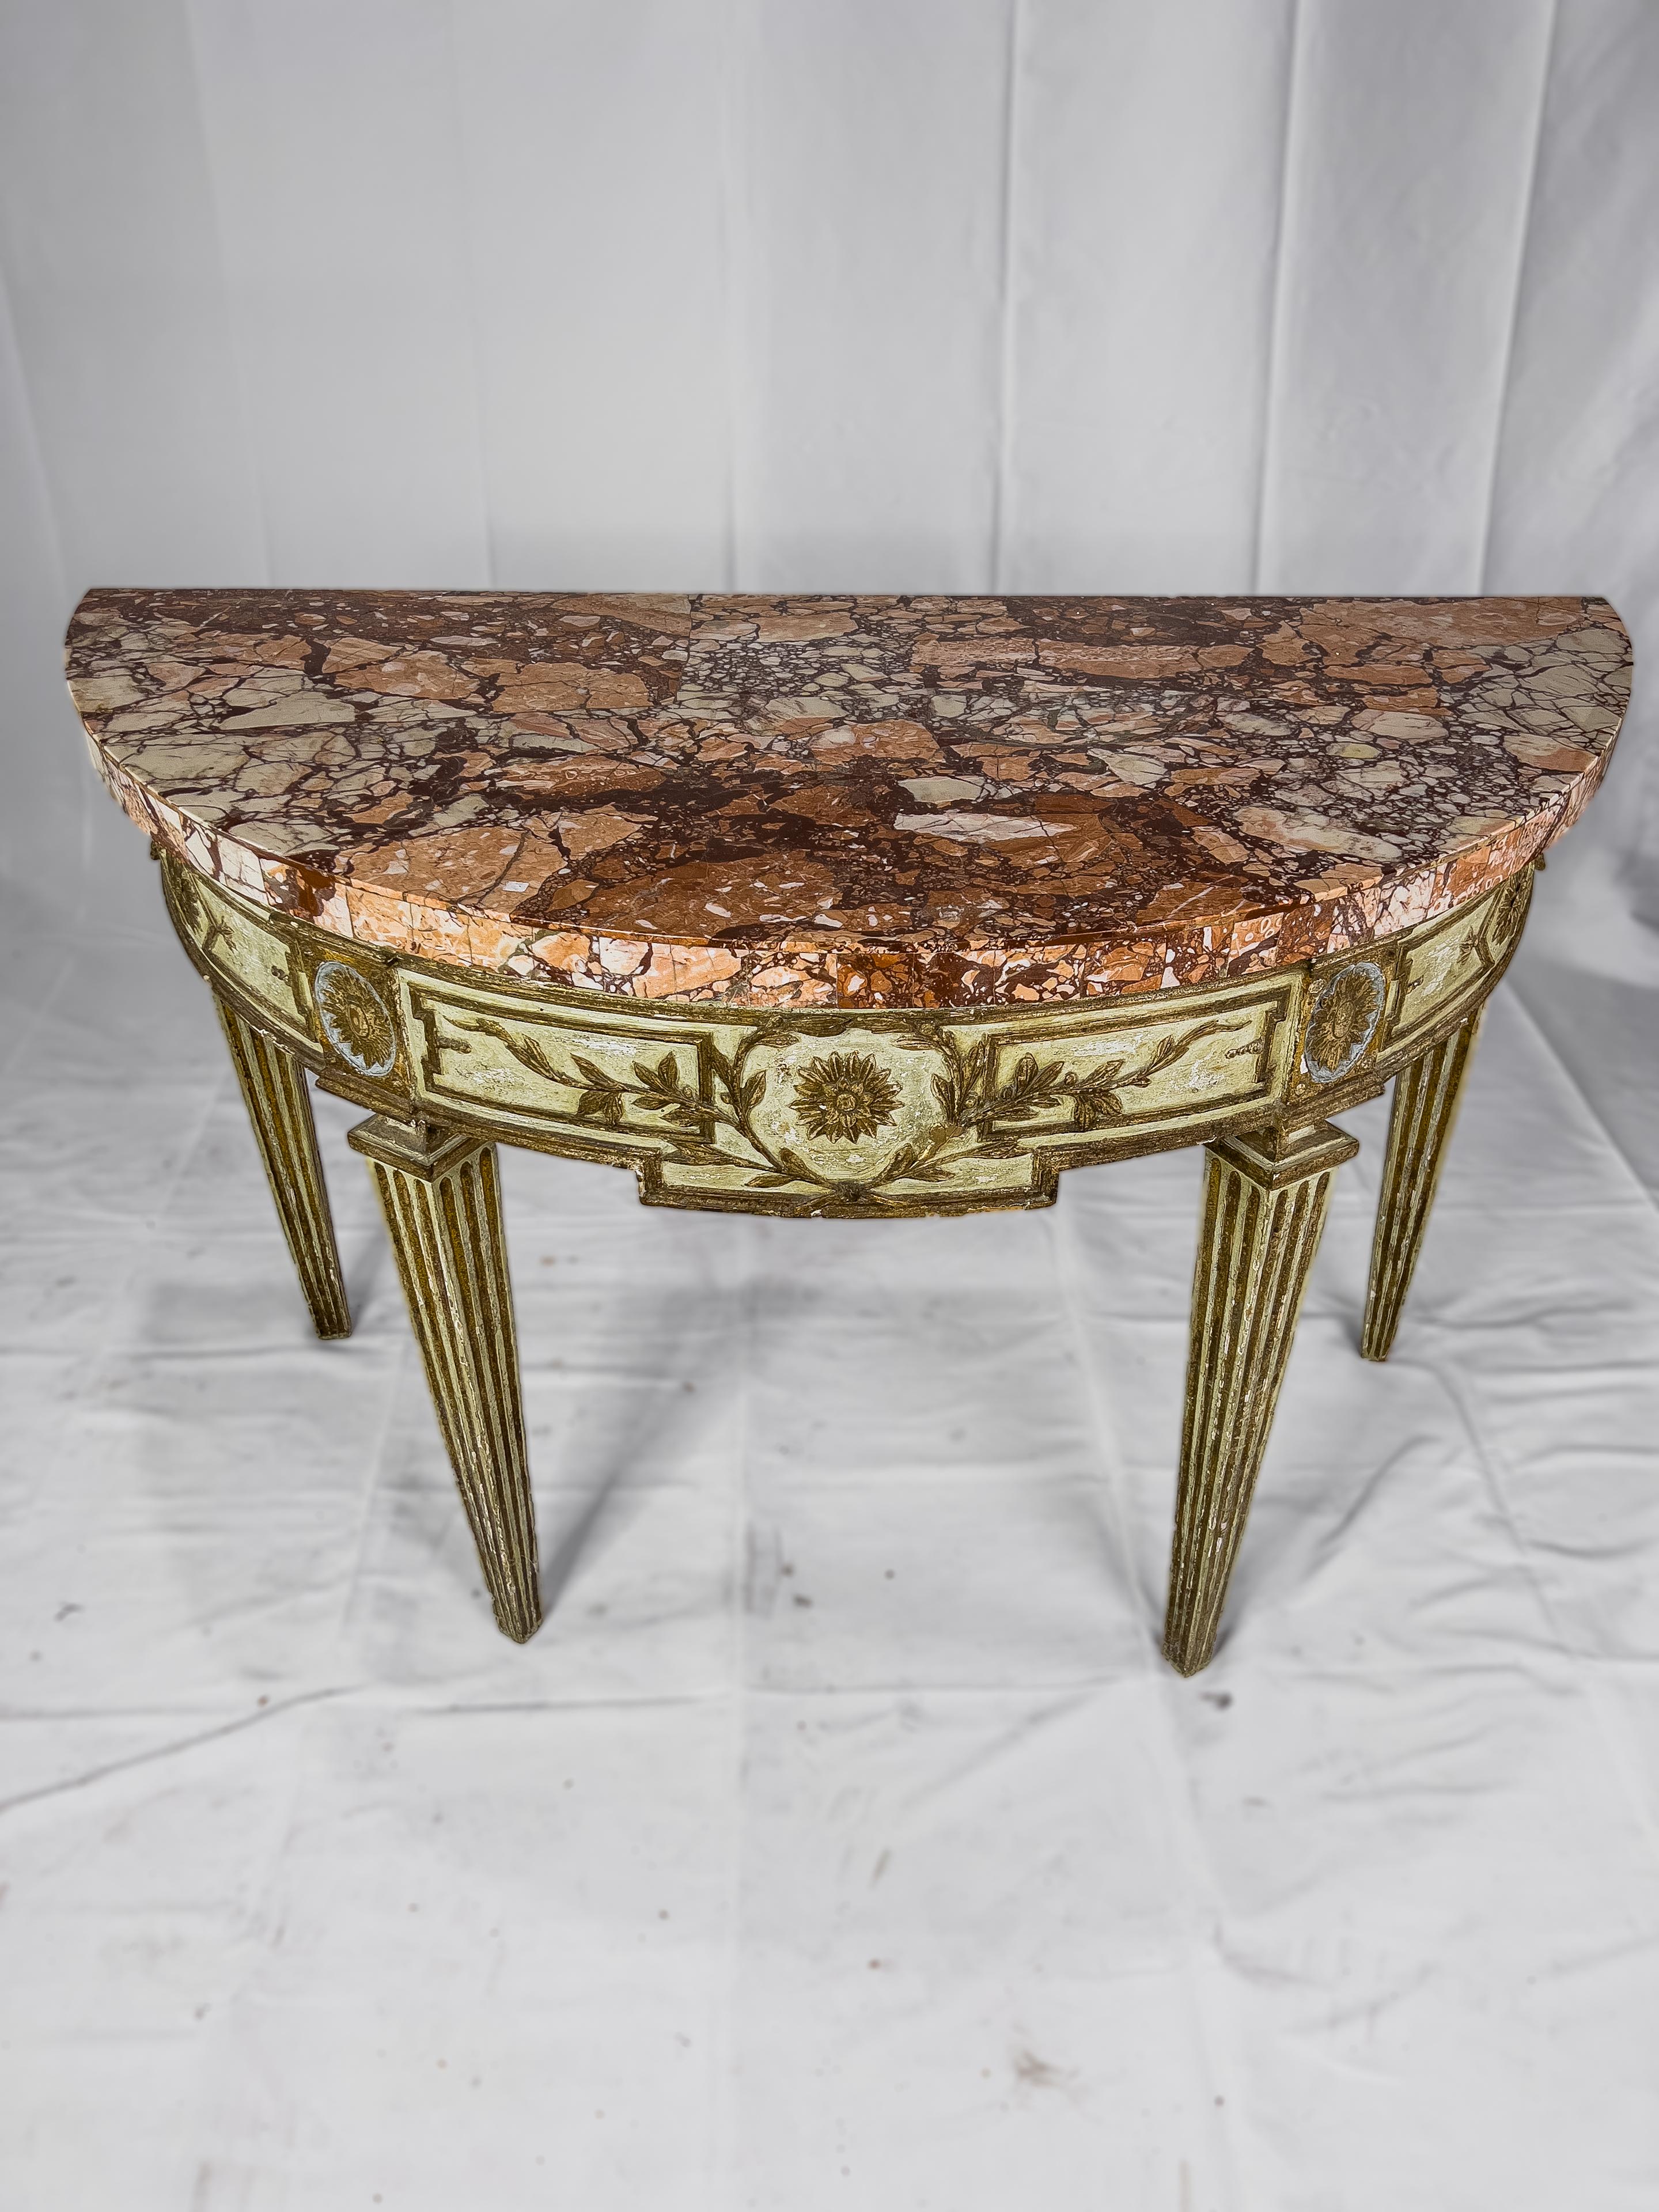 18th century Italian demilune console with original paint, gilt detail, straight tapered legs and marble top. From Napoli, Italy.